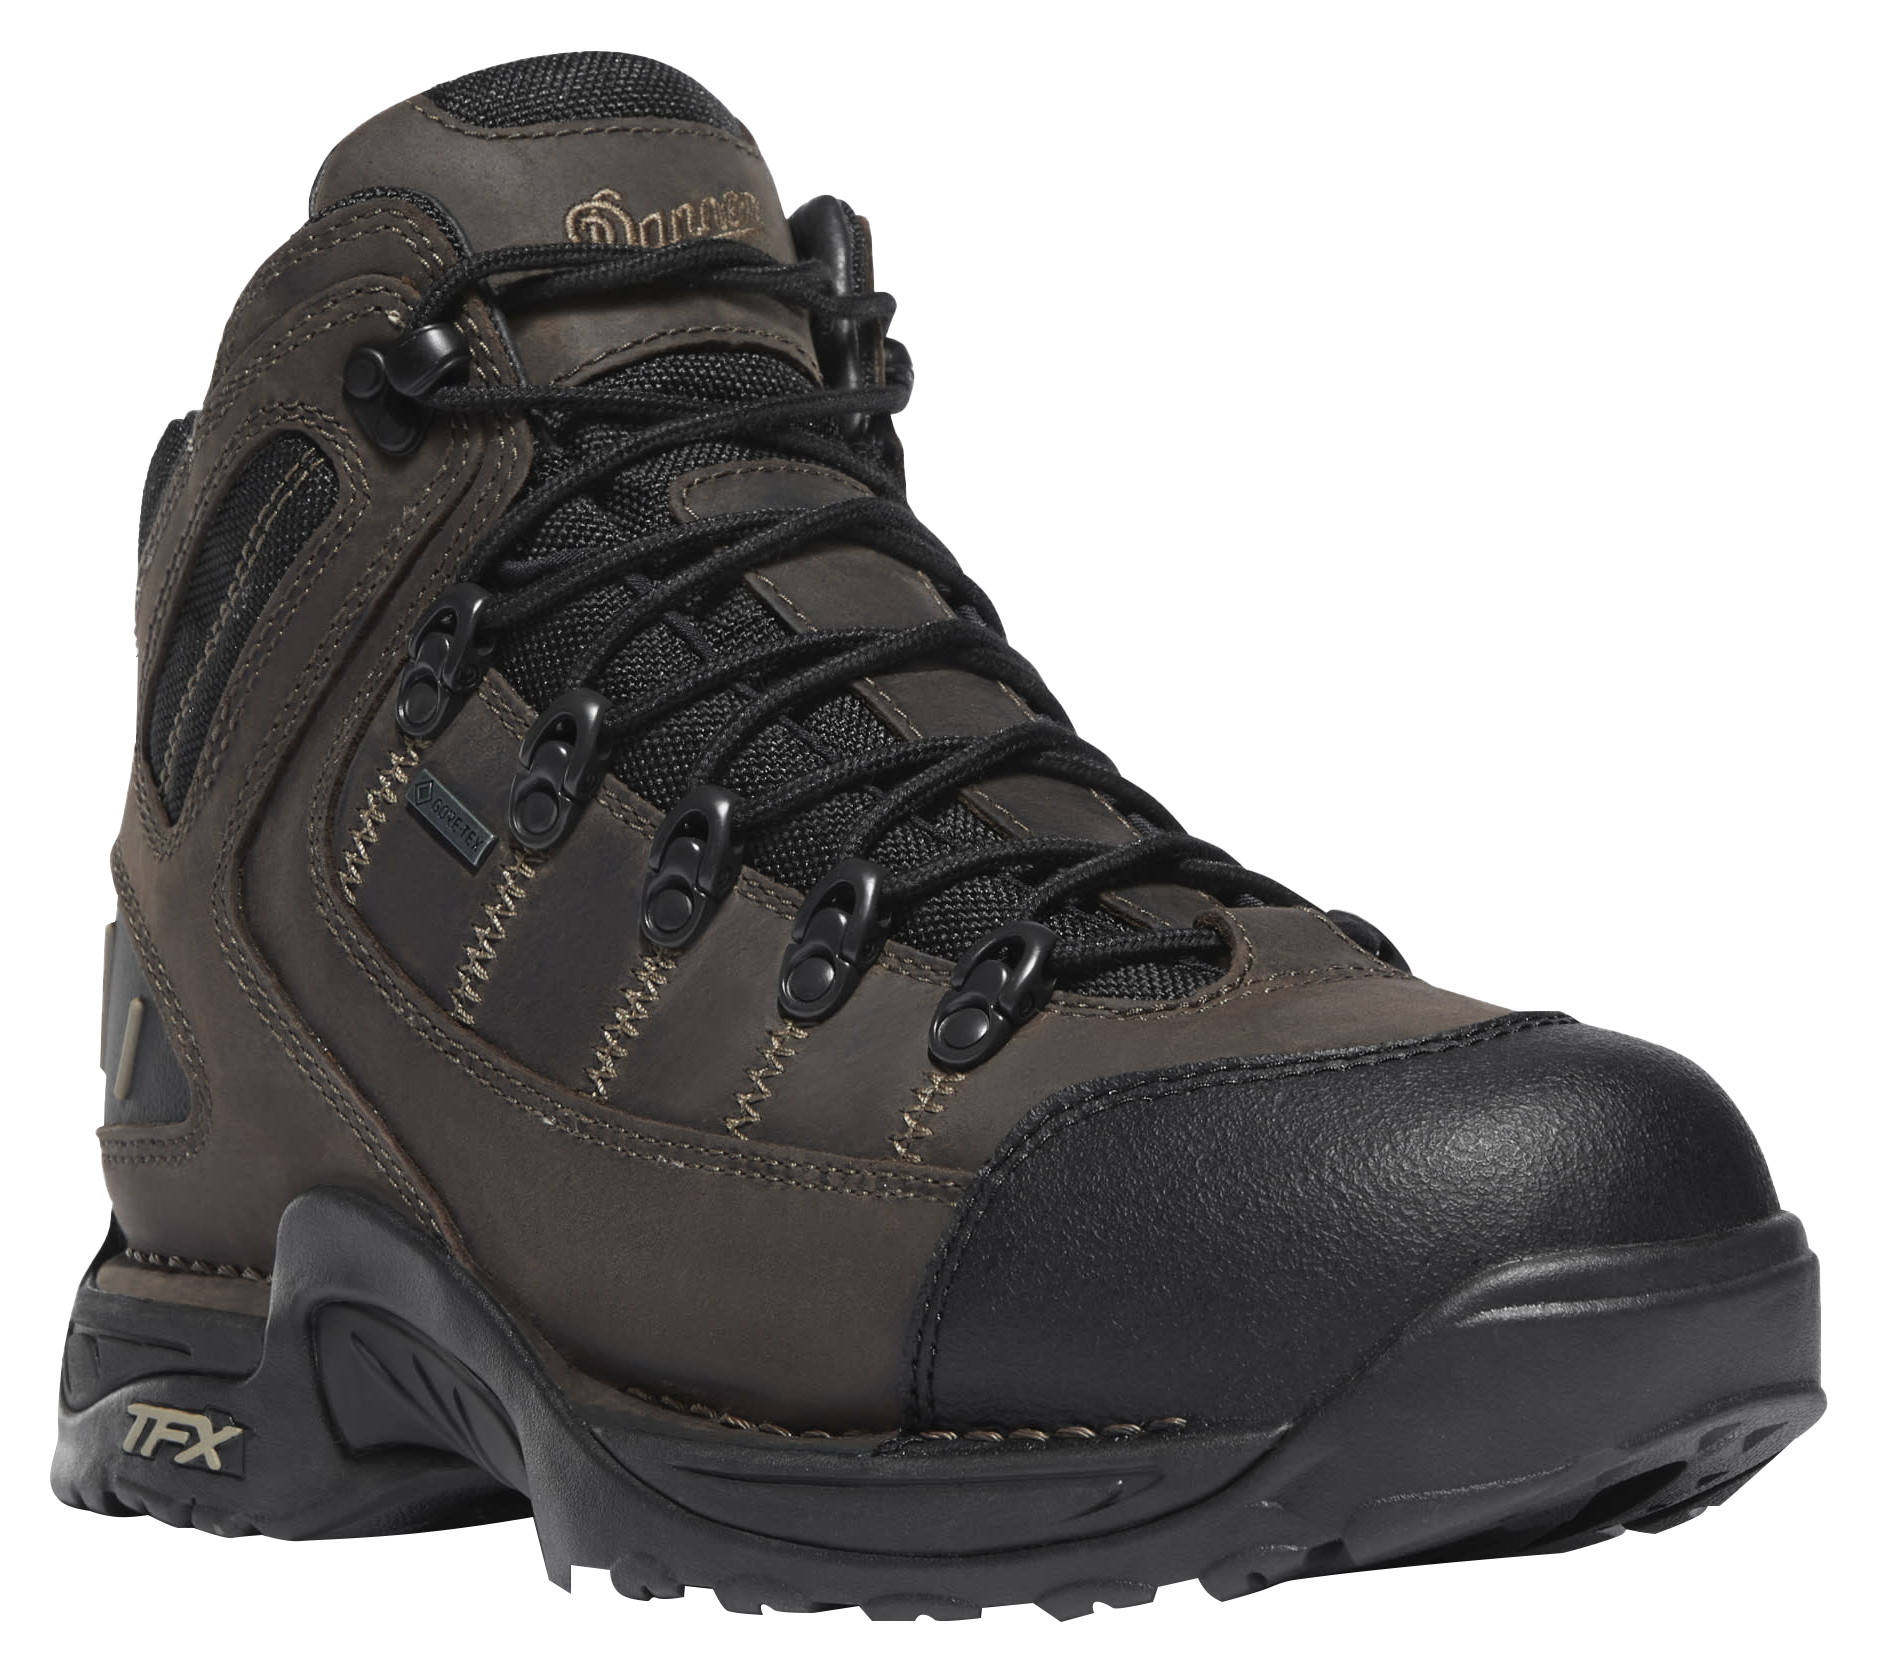 Danner 453 GORE-TEX Waterproof Hiking Boots for Men - Loam Brown/Chocolate Chip - 7M